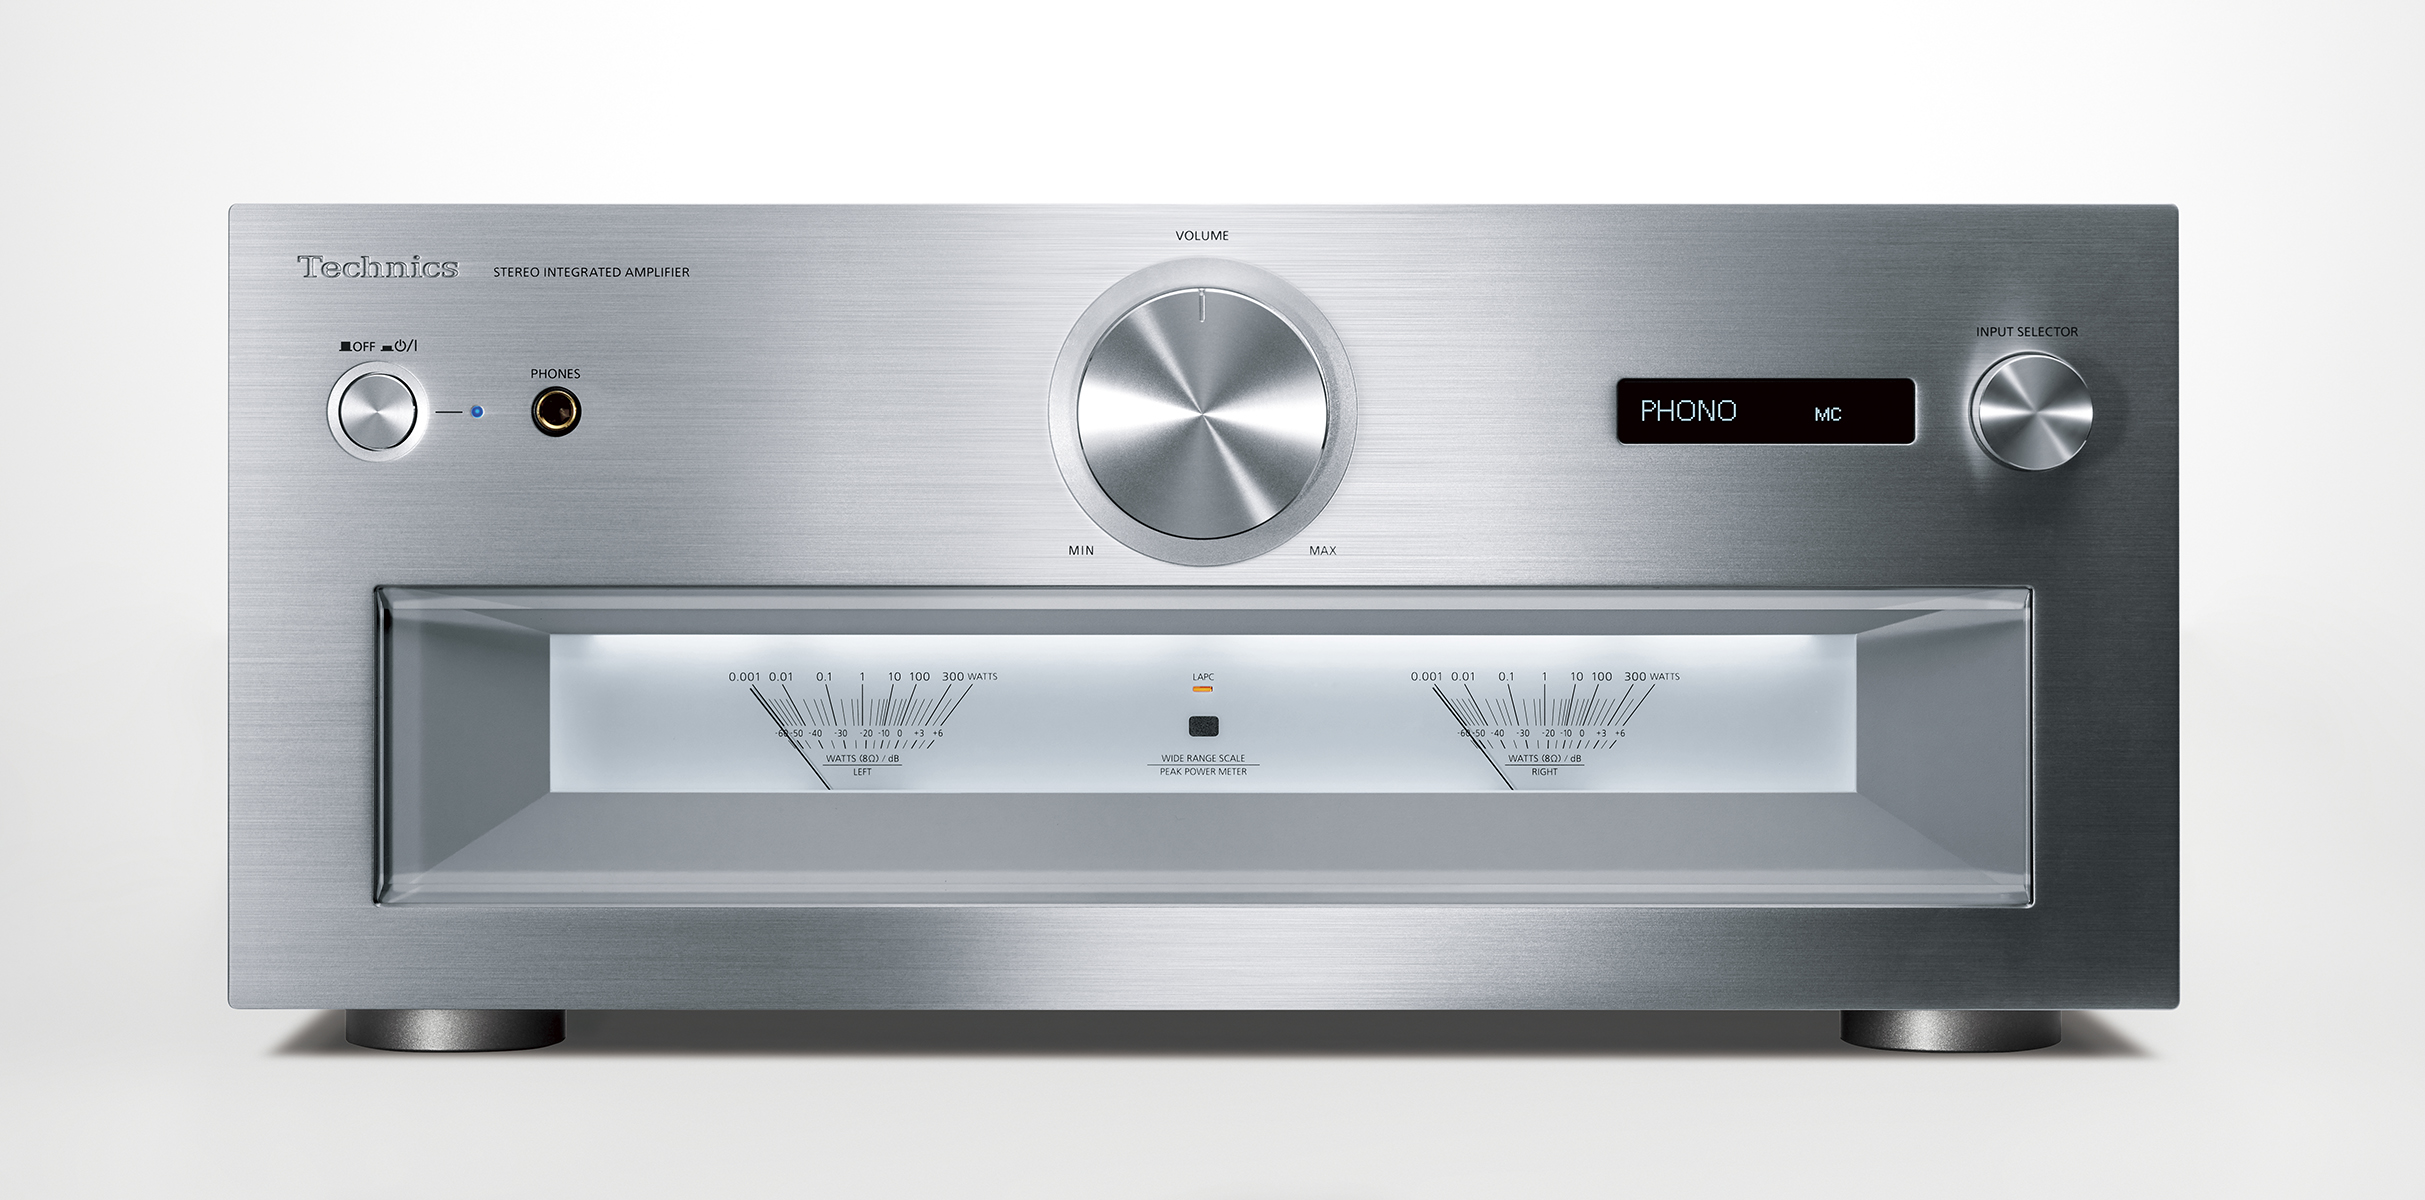 Technics SU-R1000 Integrated Amplifier – A Video Review